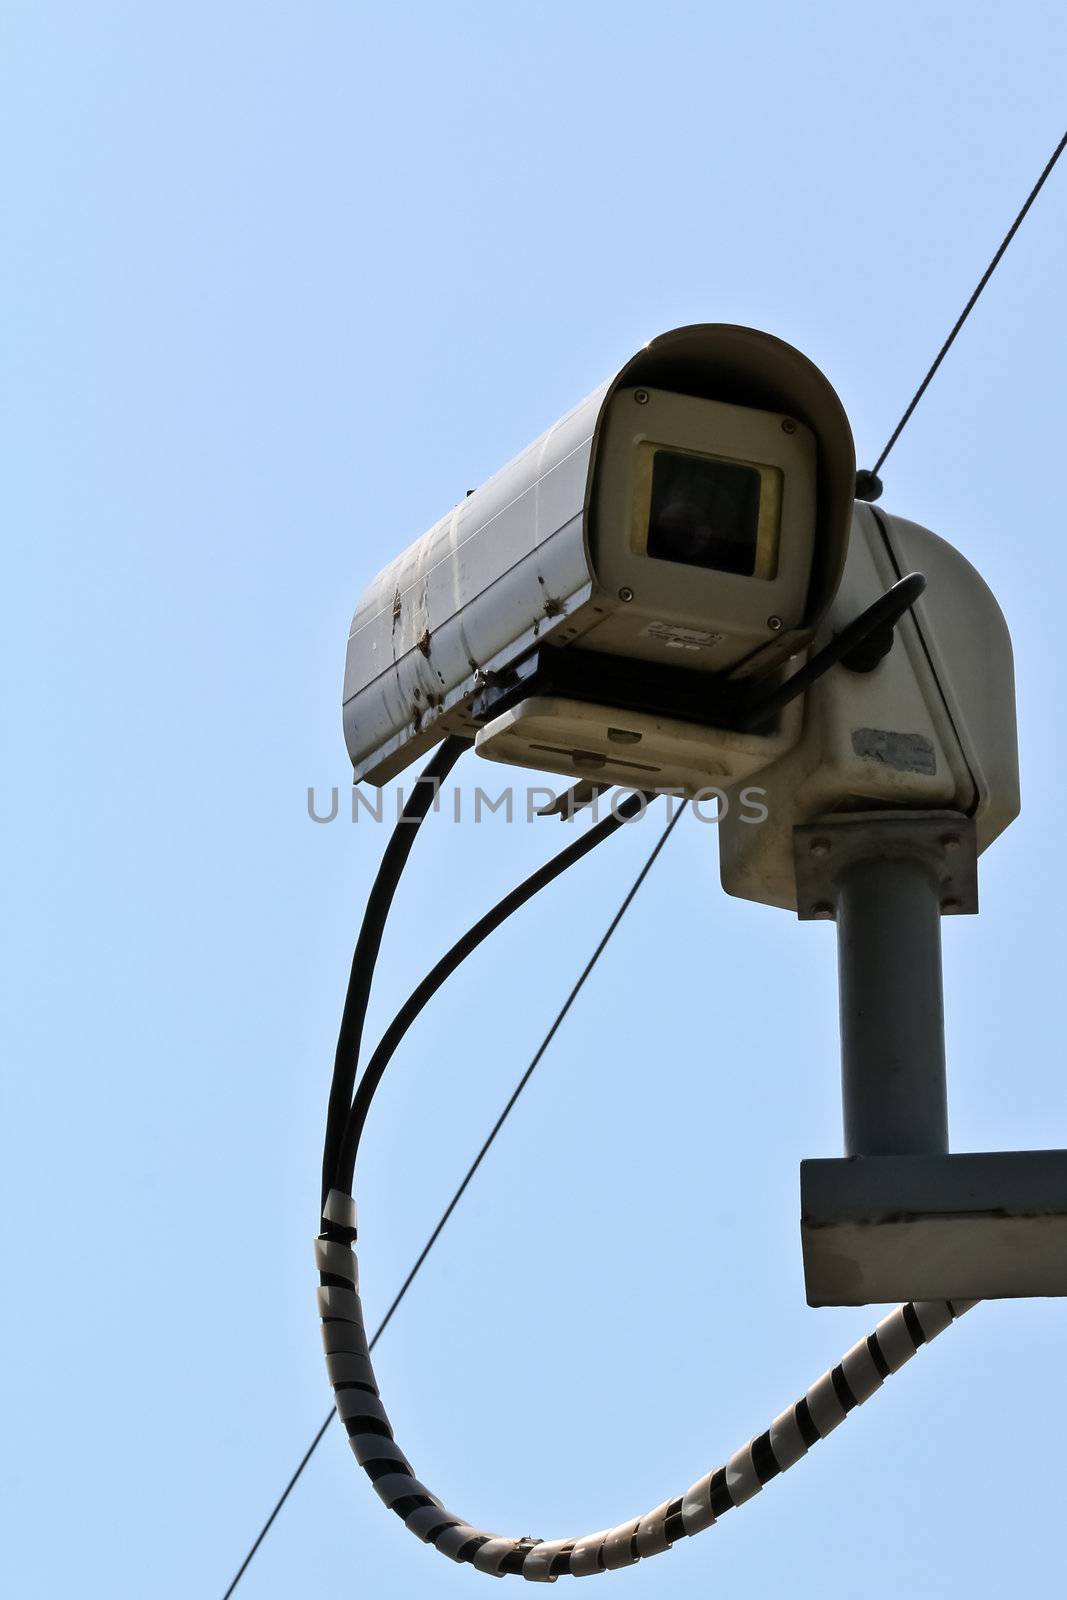 A public surveillance camera in Vienna with dirt on it